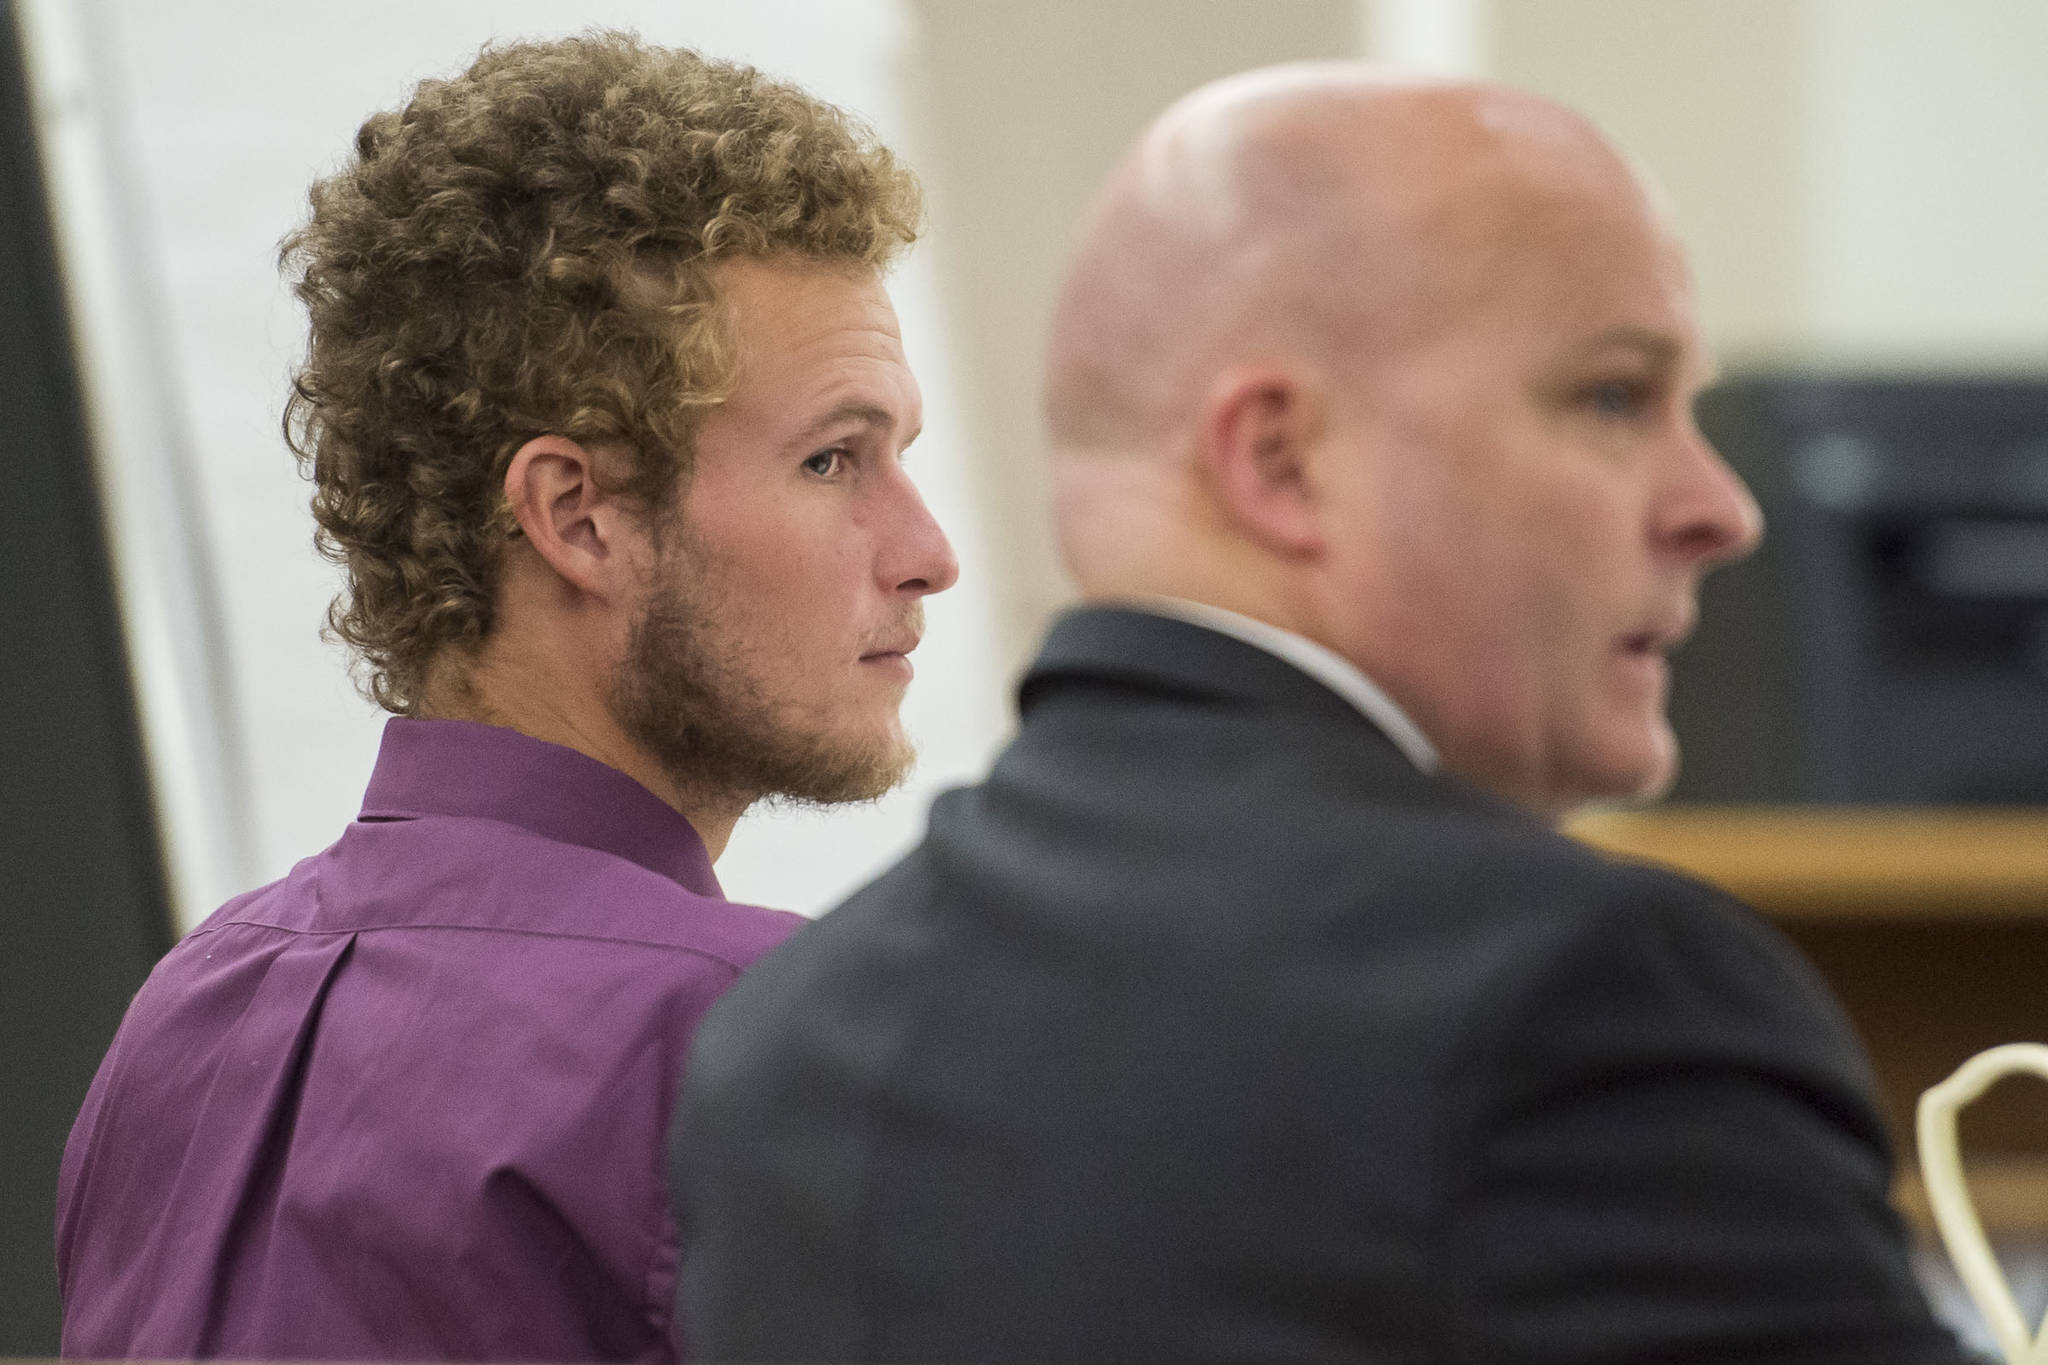 Ty Grussendorf, 24, left, appears in Juneau Superior Court with his attorney, John P. Cashion, to plead guilty to two counts of sexual abuse of a minor on Monday, Oct. 22, 2018. (Michael Penn | Juneau Empire File)